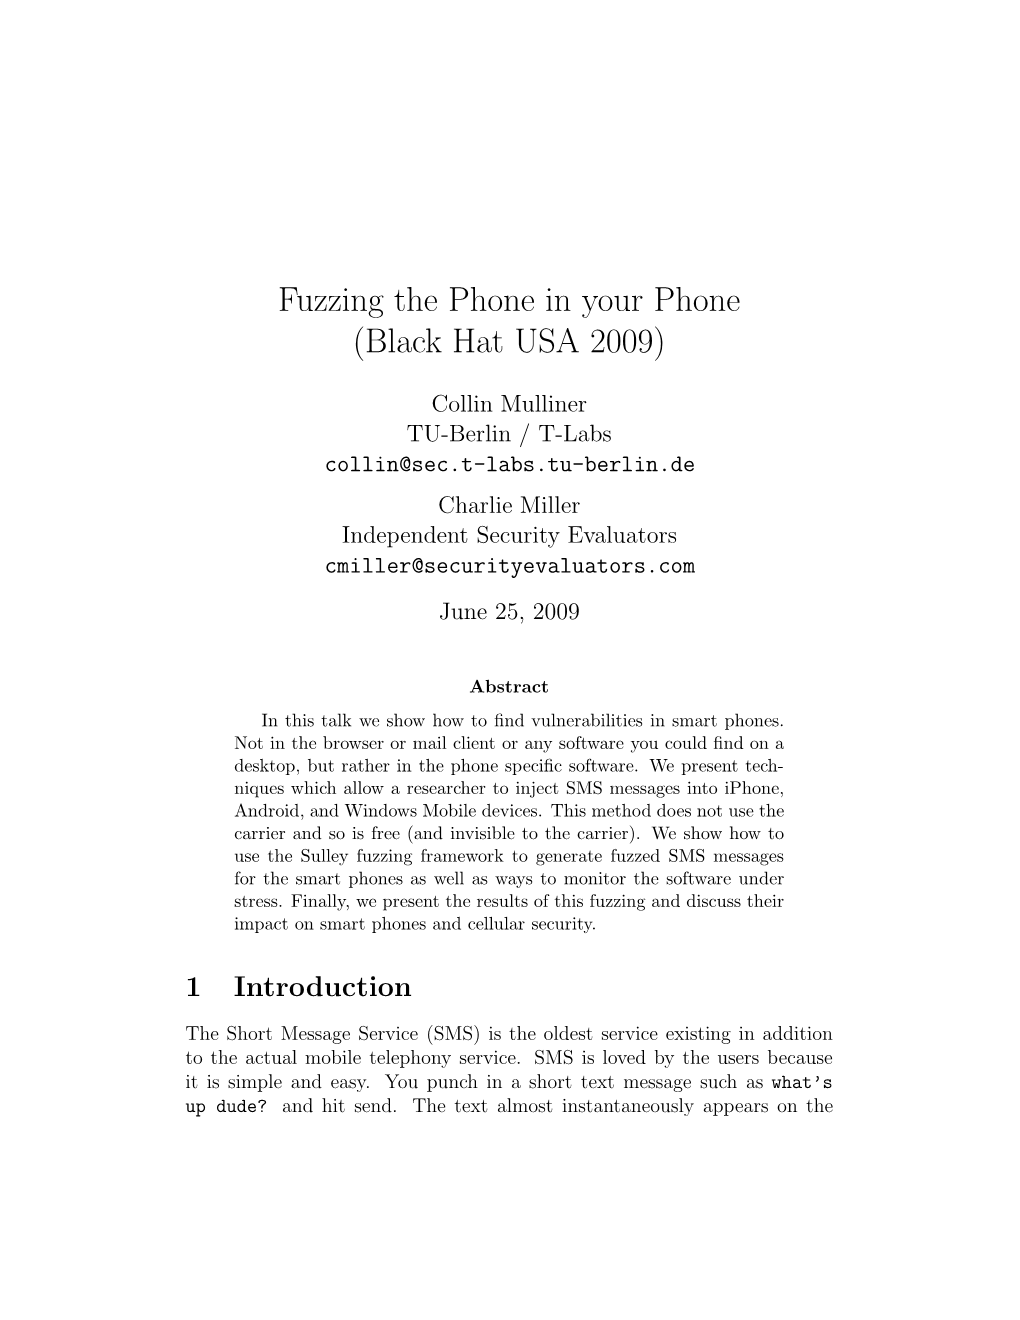 Fuzzing the Phone in Your Phone (Black Hat USA 2009)